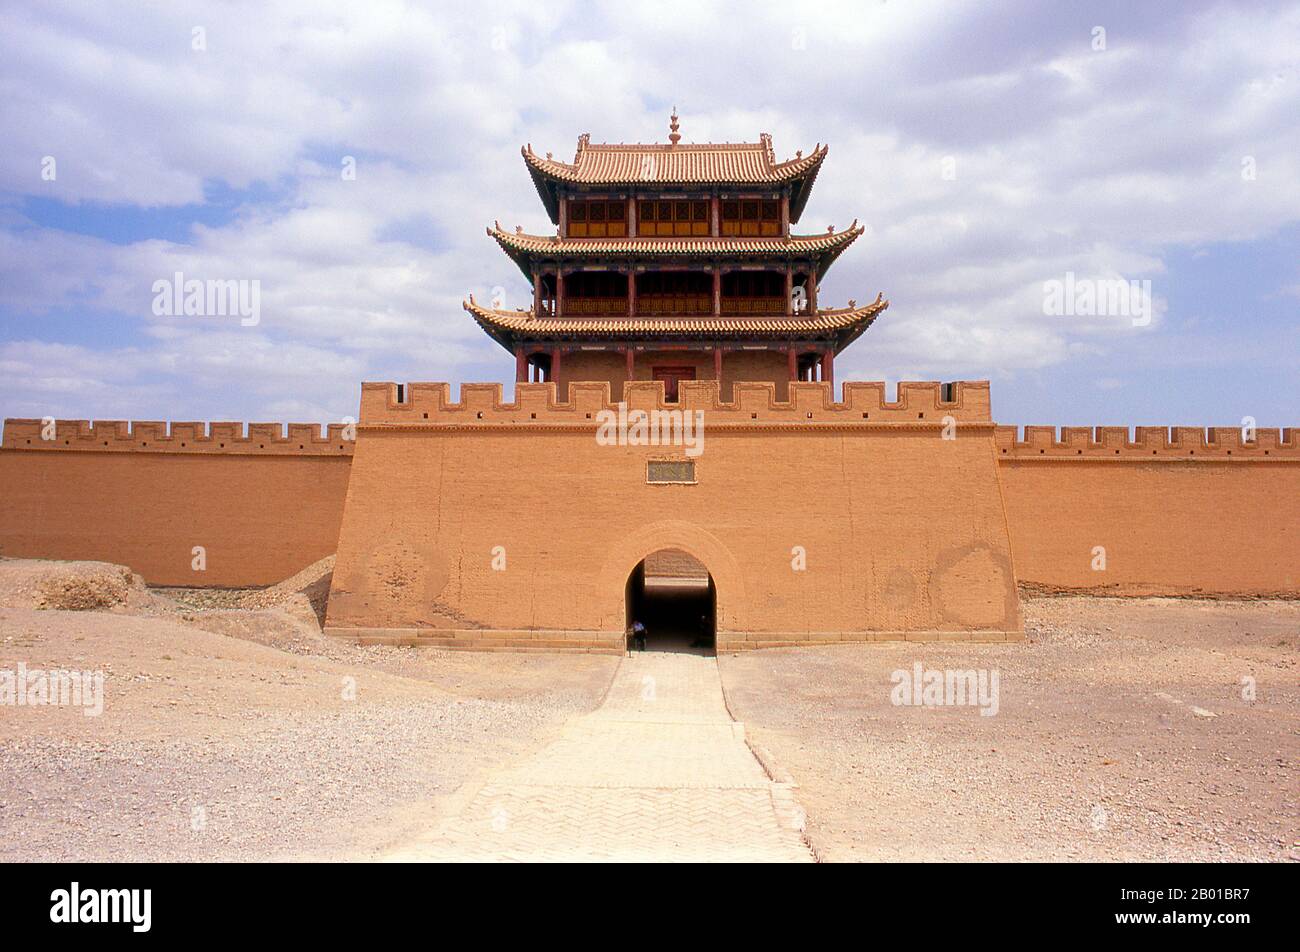 China: Western gate and tower at Jiayuguan Fort, Gansu Province.  Jiayuguan, the ‘First and Greatest Pass under Heaven’, was completed in 1372 on the orders of Zhu Yuanzhang, the first Ming Emperor (1368-98), to mark the end of the Ming Great Wall. It was also the very limits of Chinese civilisation, and the beginnings of the outer ‘barbarian’ lands.  For centuries the fort was not just of strategic importance to Han Chinese, but of cultural significance as well. This was the last civilised place before the outer darkness, and those proceeding beyond faced a life of exile. Stock Photo